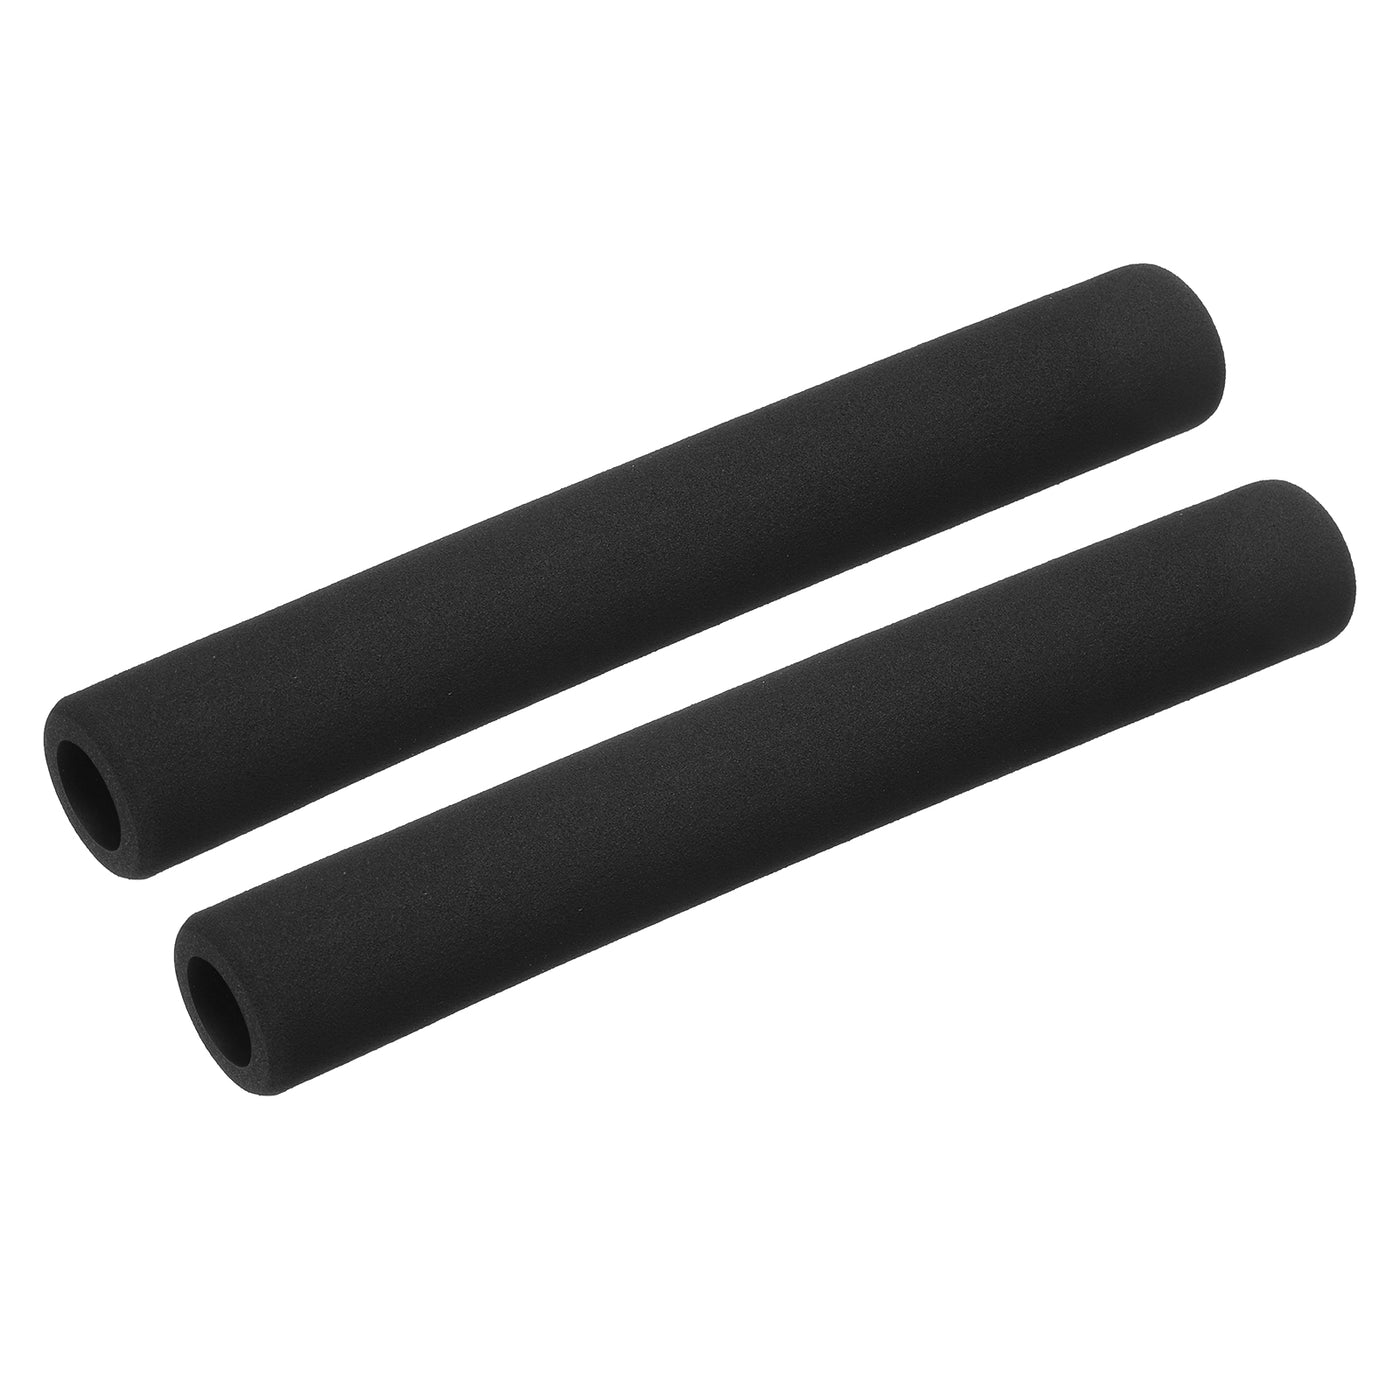 uxcell Uxcell Pipe Insulation Tube Foam Tubing for Handle Grip Support 18mm ID 28mm OD 200mm Heat Preservation Black 2pcs